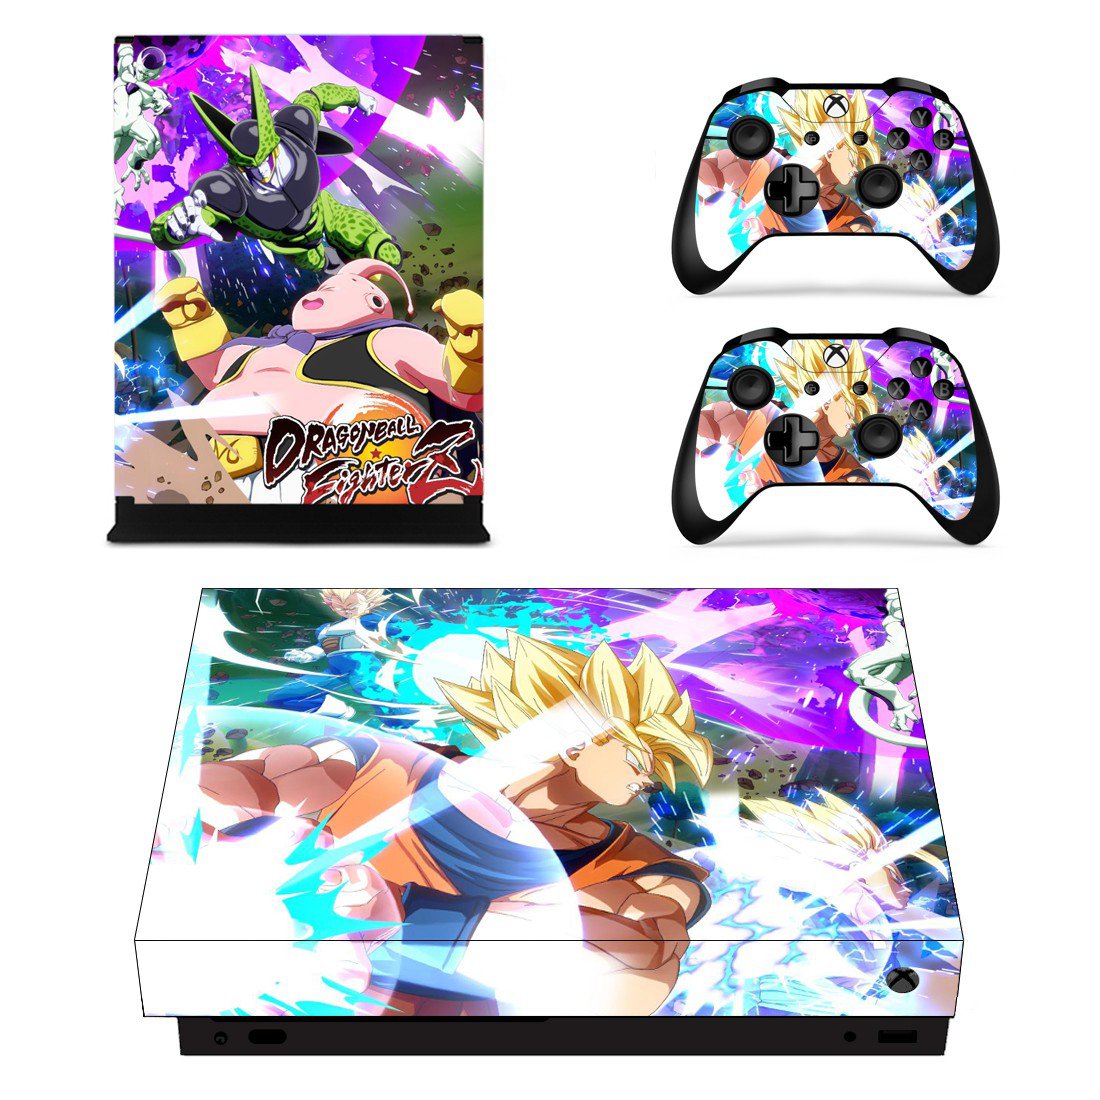 Dragon Ball FighterZ Decal Skin Sticker for Xbox One X and Controllers